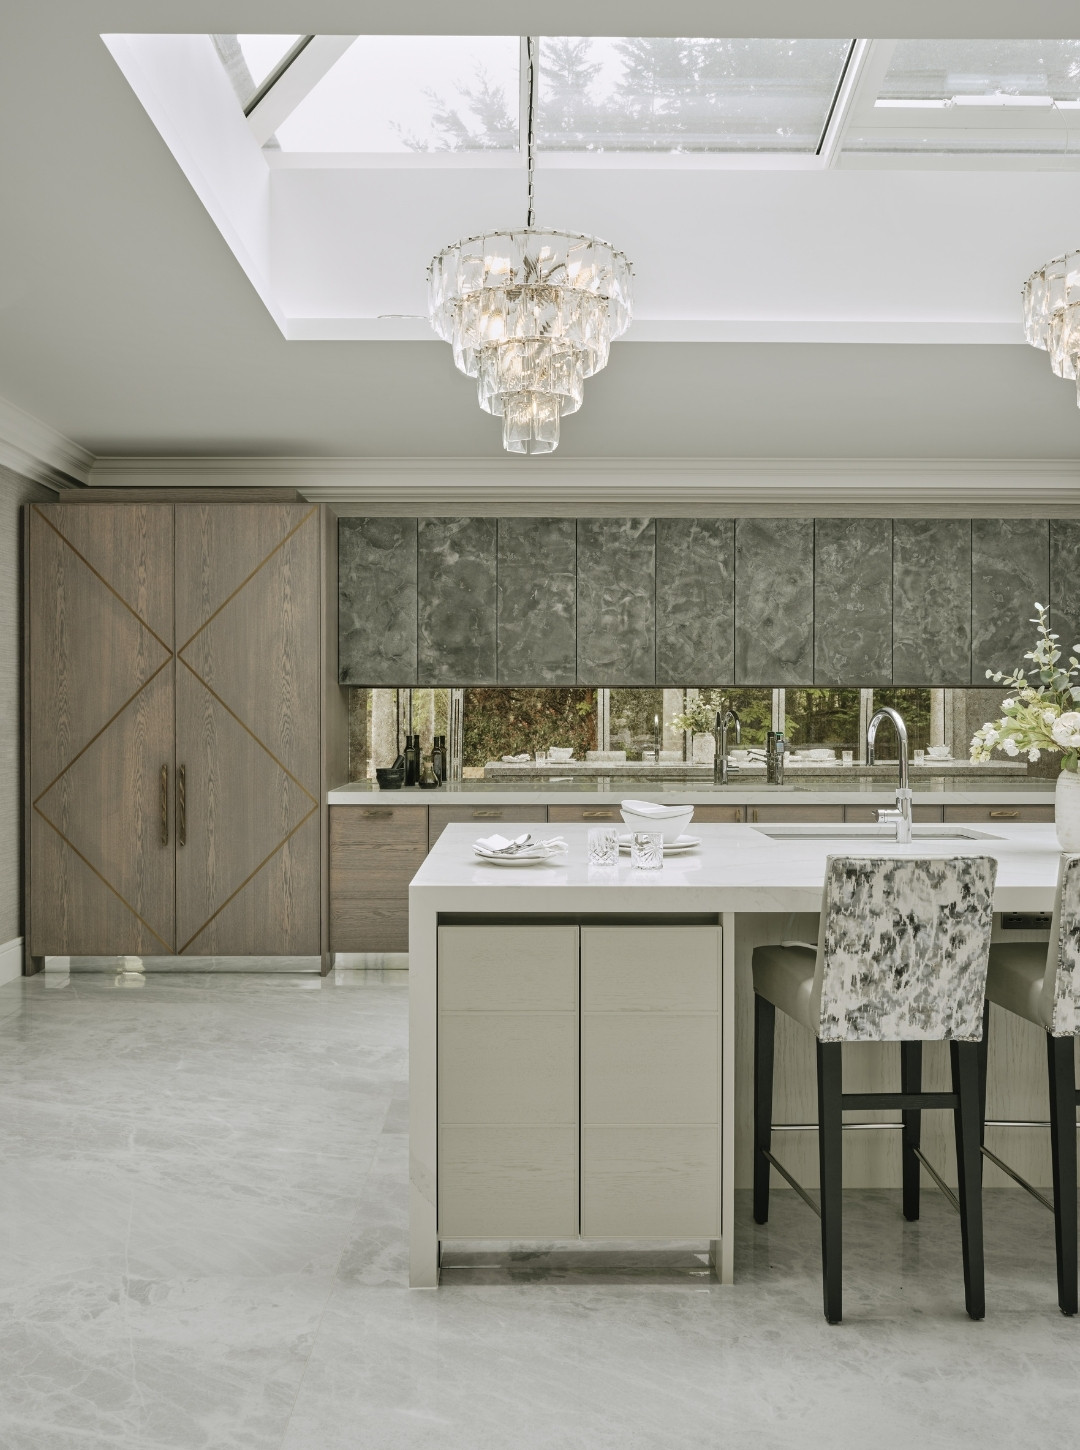 family kitchen, The New Ascot Kitchen is a Show-Stopping Design with Family Life at Its Heart